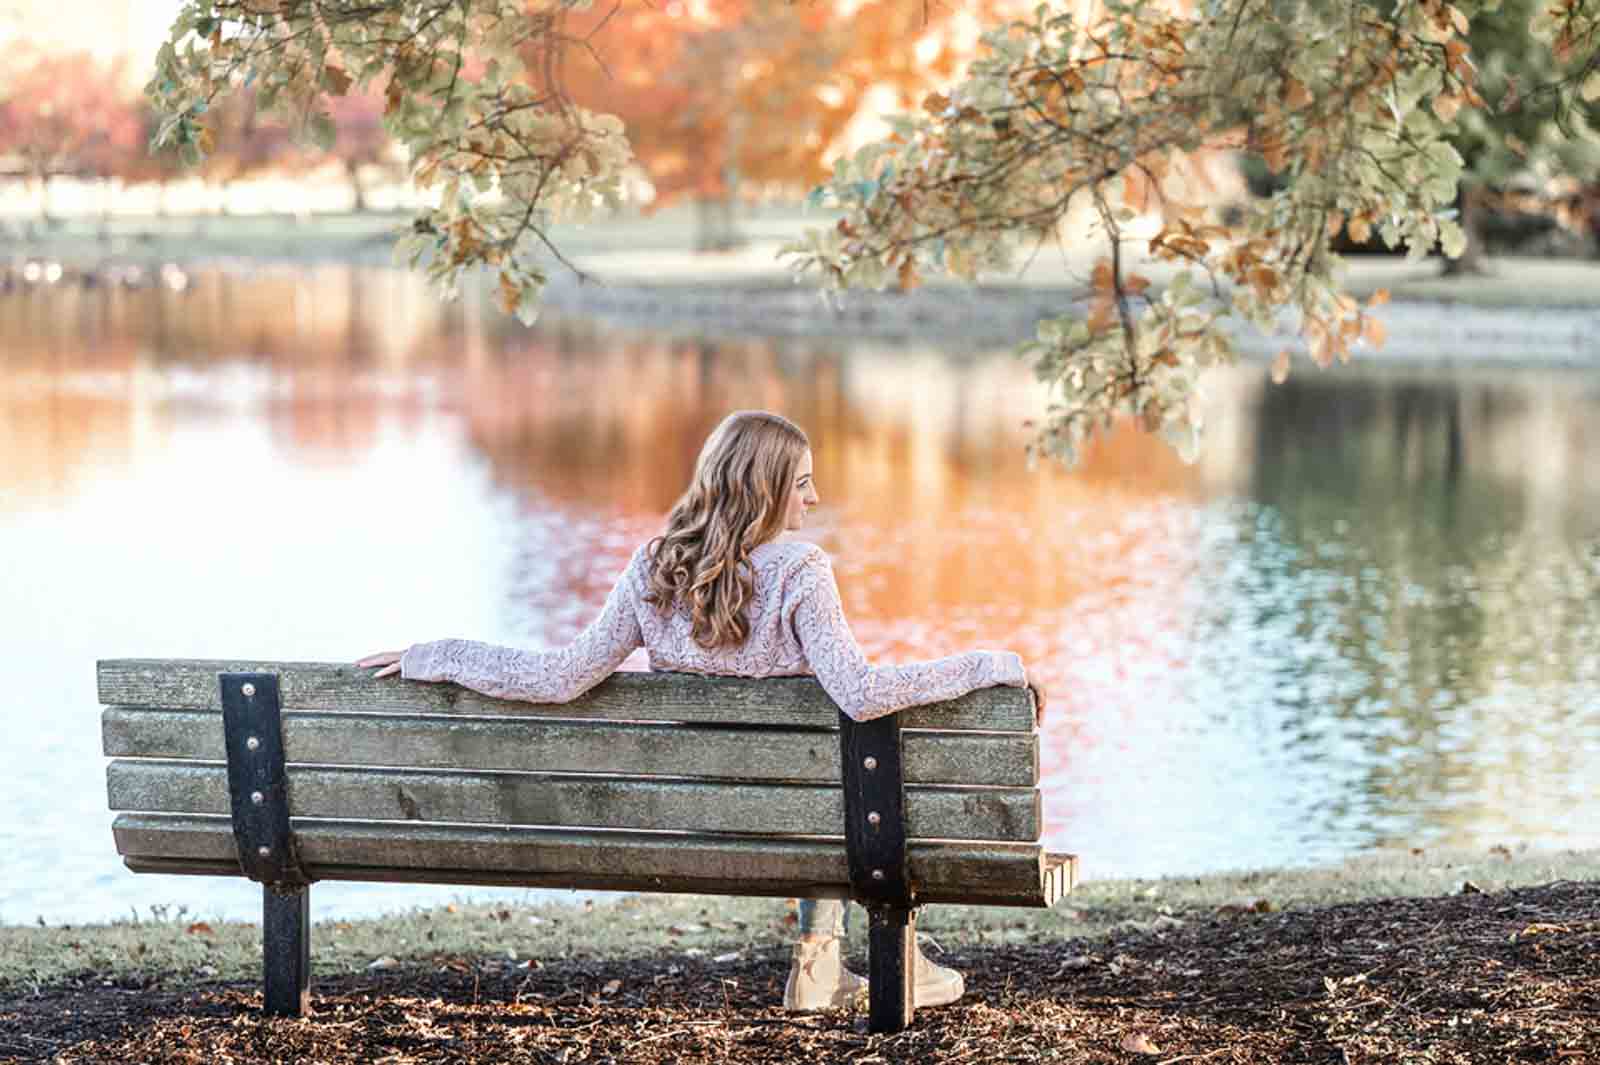 Senior Girl sitting in a chair by a pond